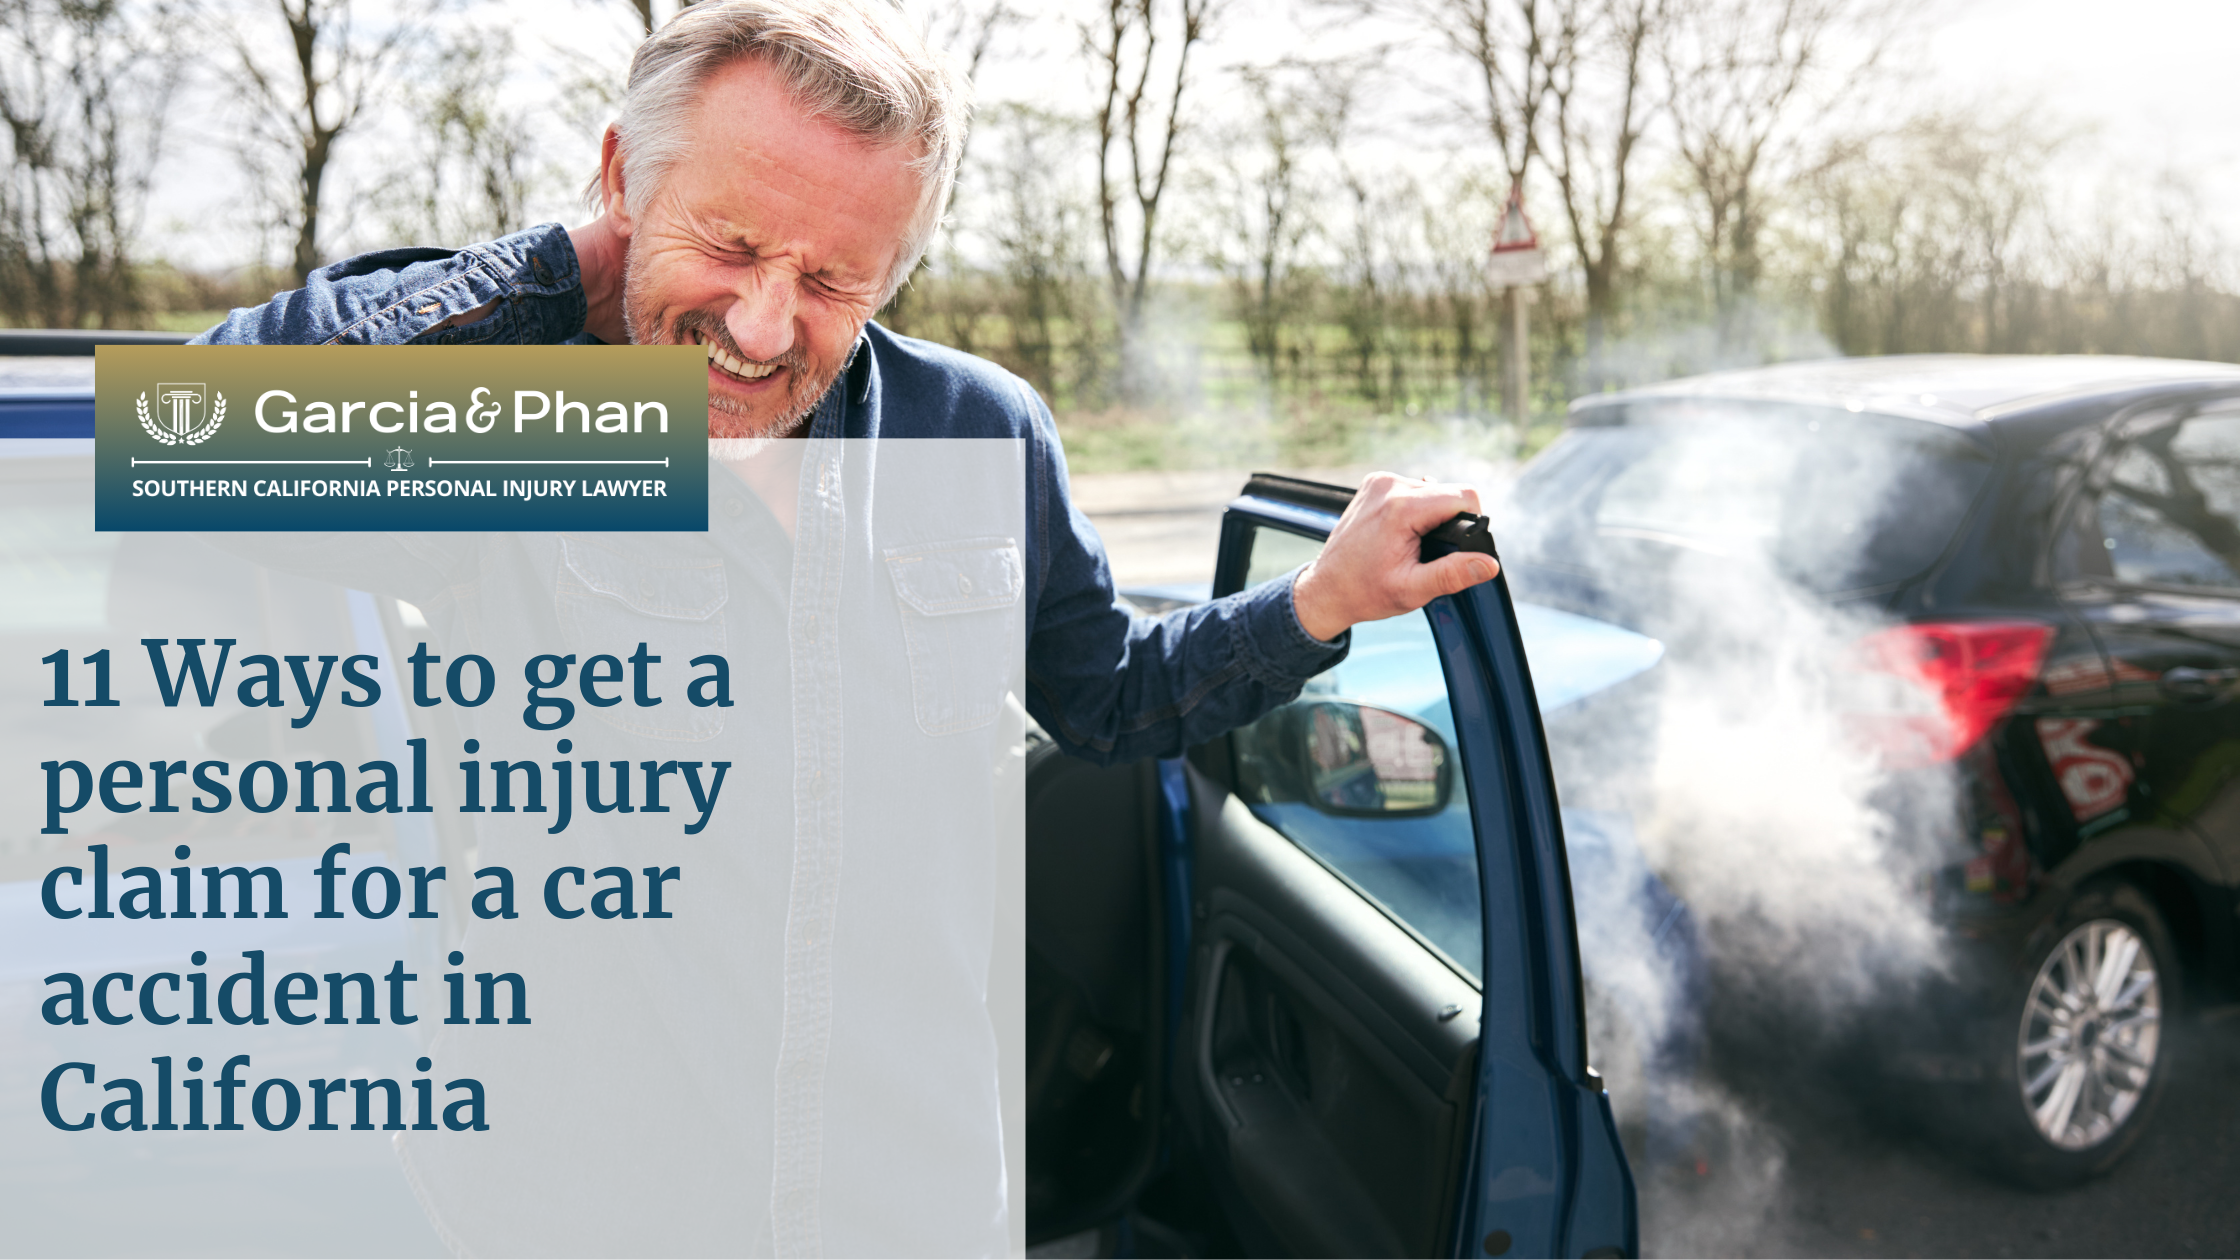 11 Ways to get a personal injury claim for a car accident in California | GP